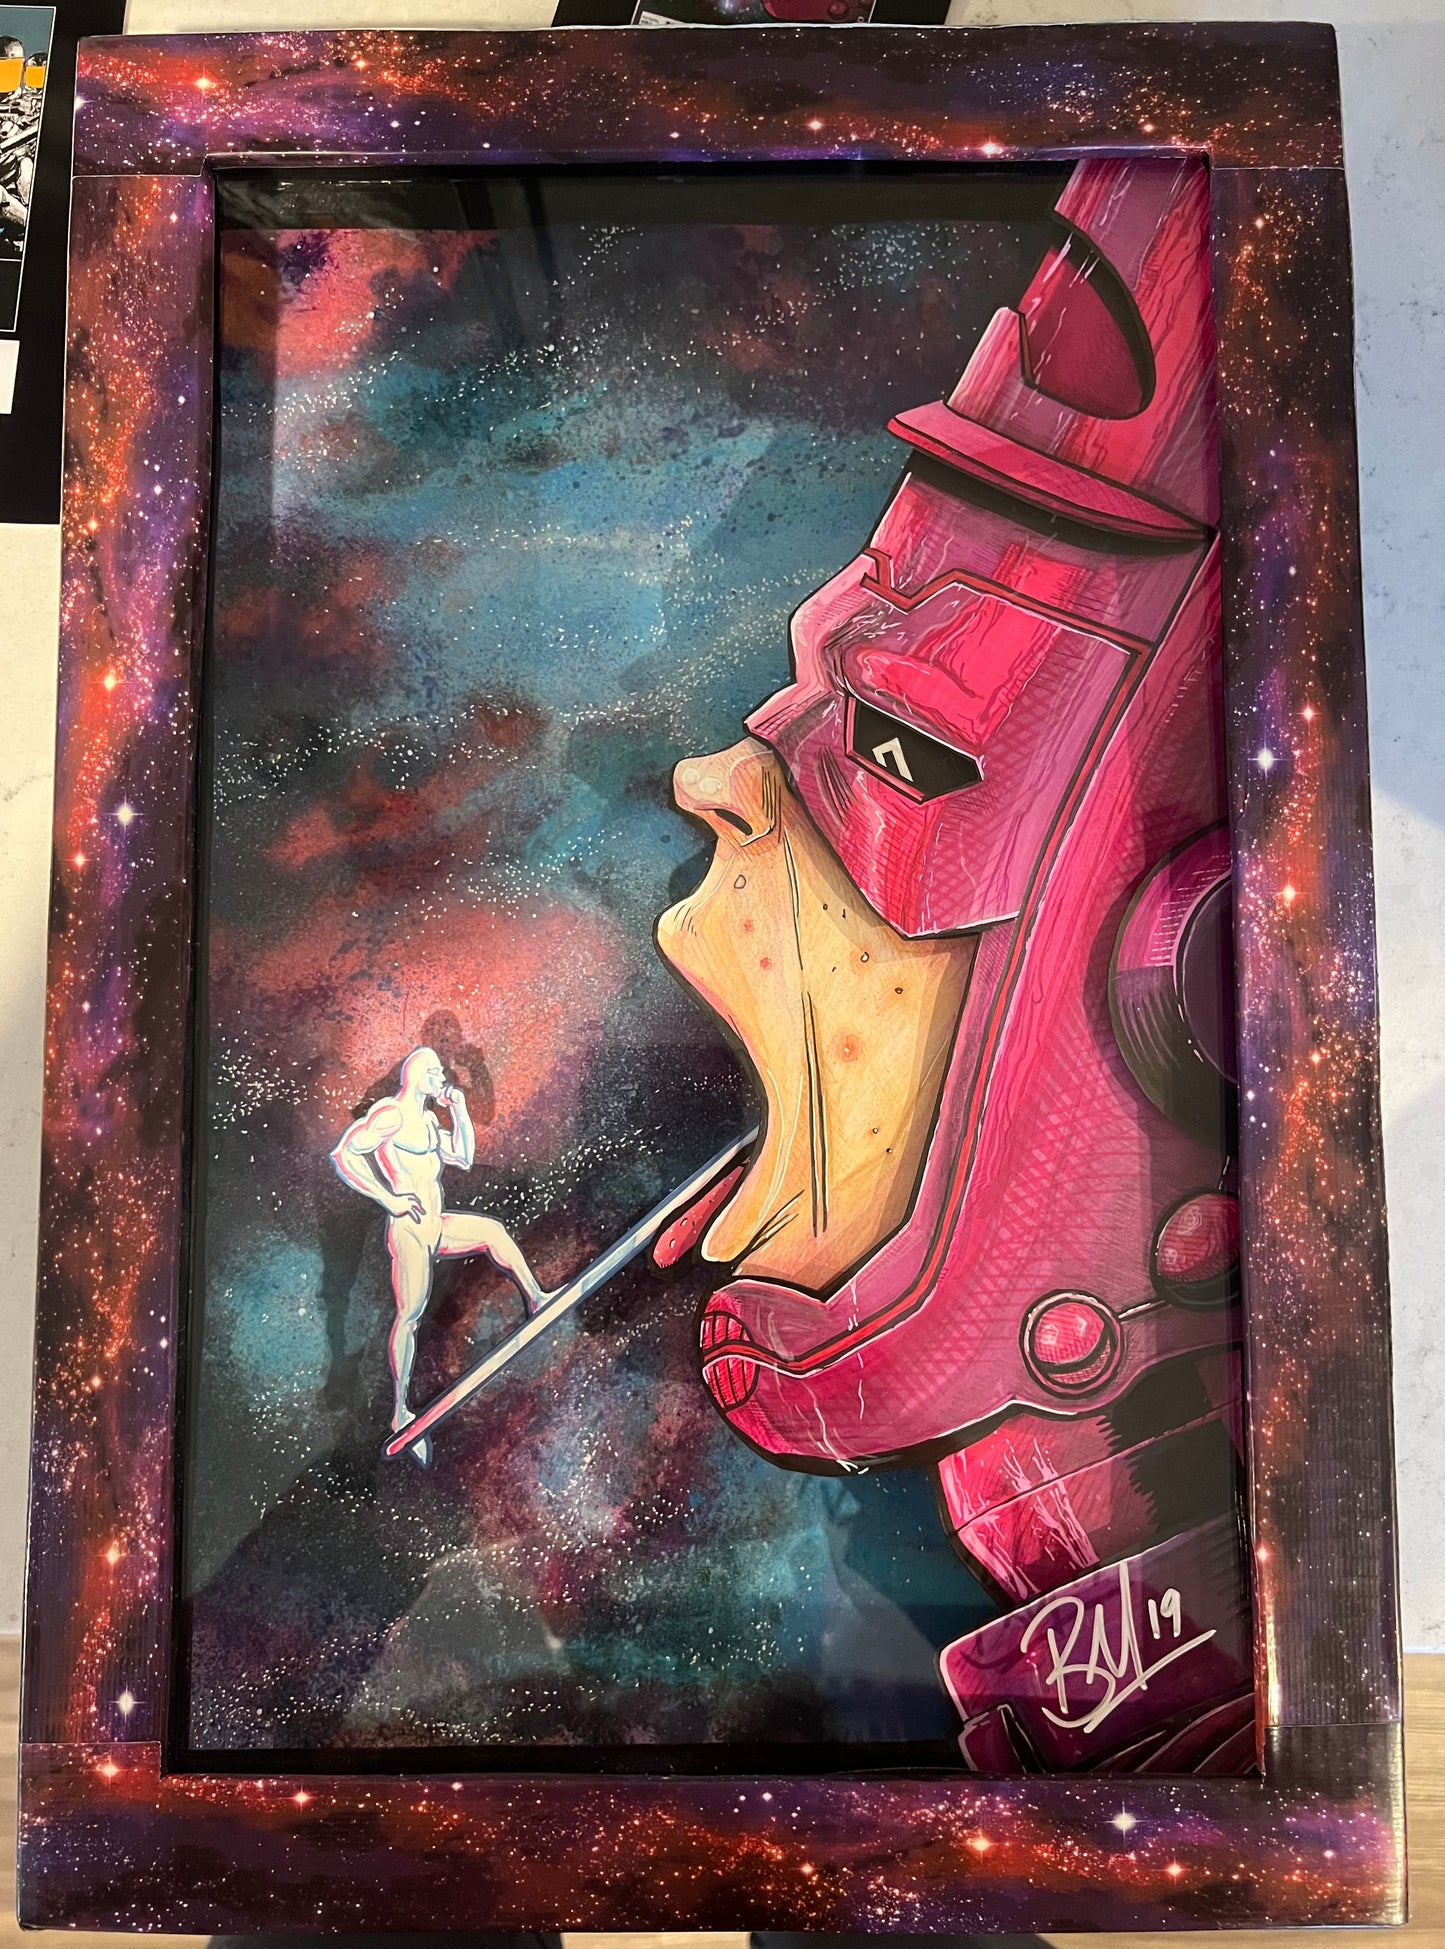 Silver Surfer & Galactus Shadowbox by Barry (A One of a Kind Shadowbox Art)